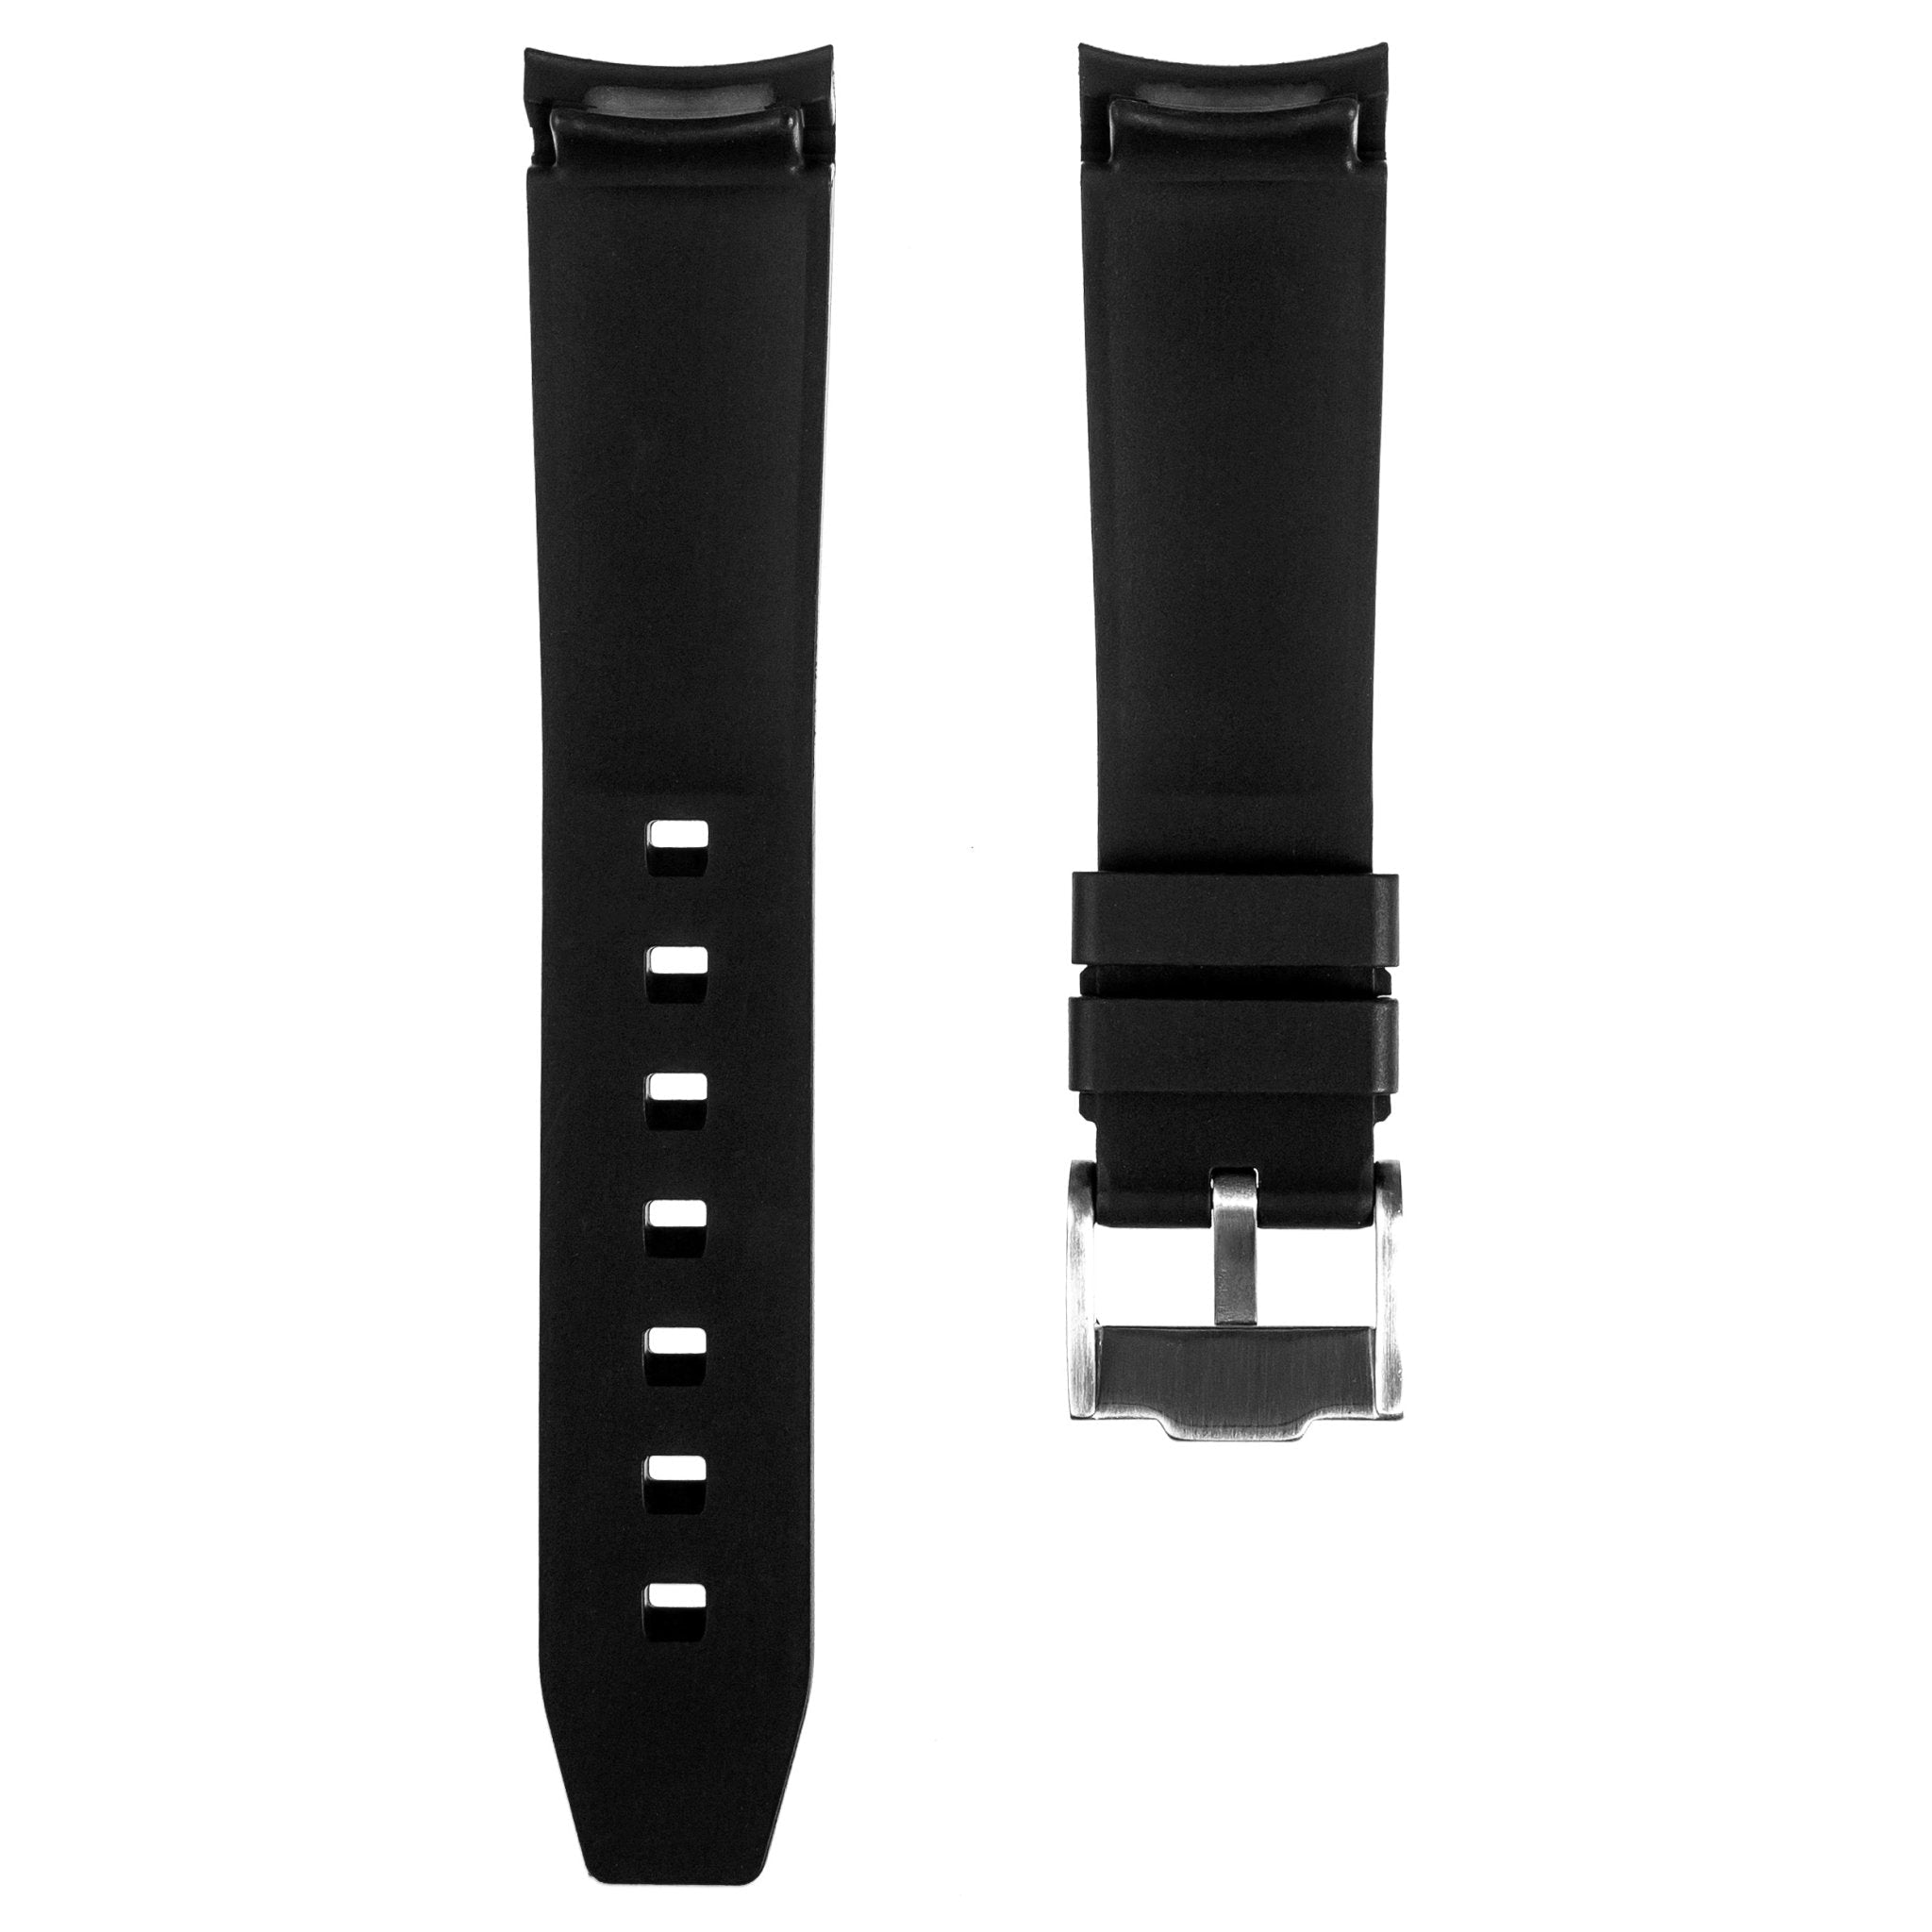 Forge Curved End FKM Rubber Strap – Compatible with Omega Moonwatch – Black (2421) -Strapseeker